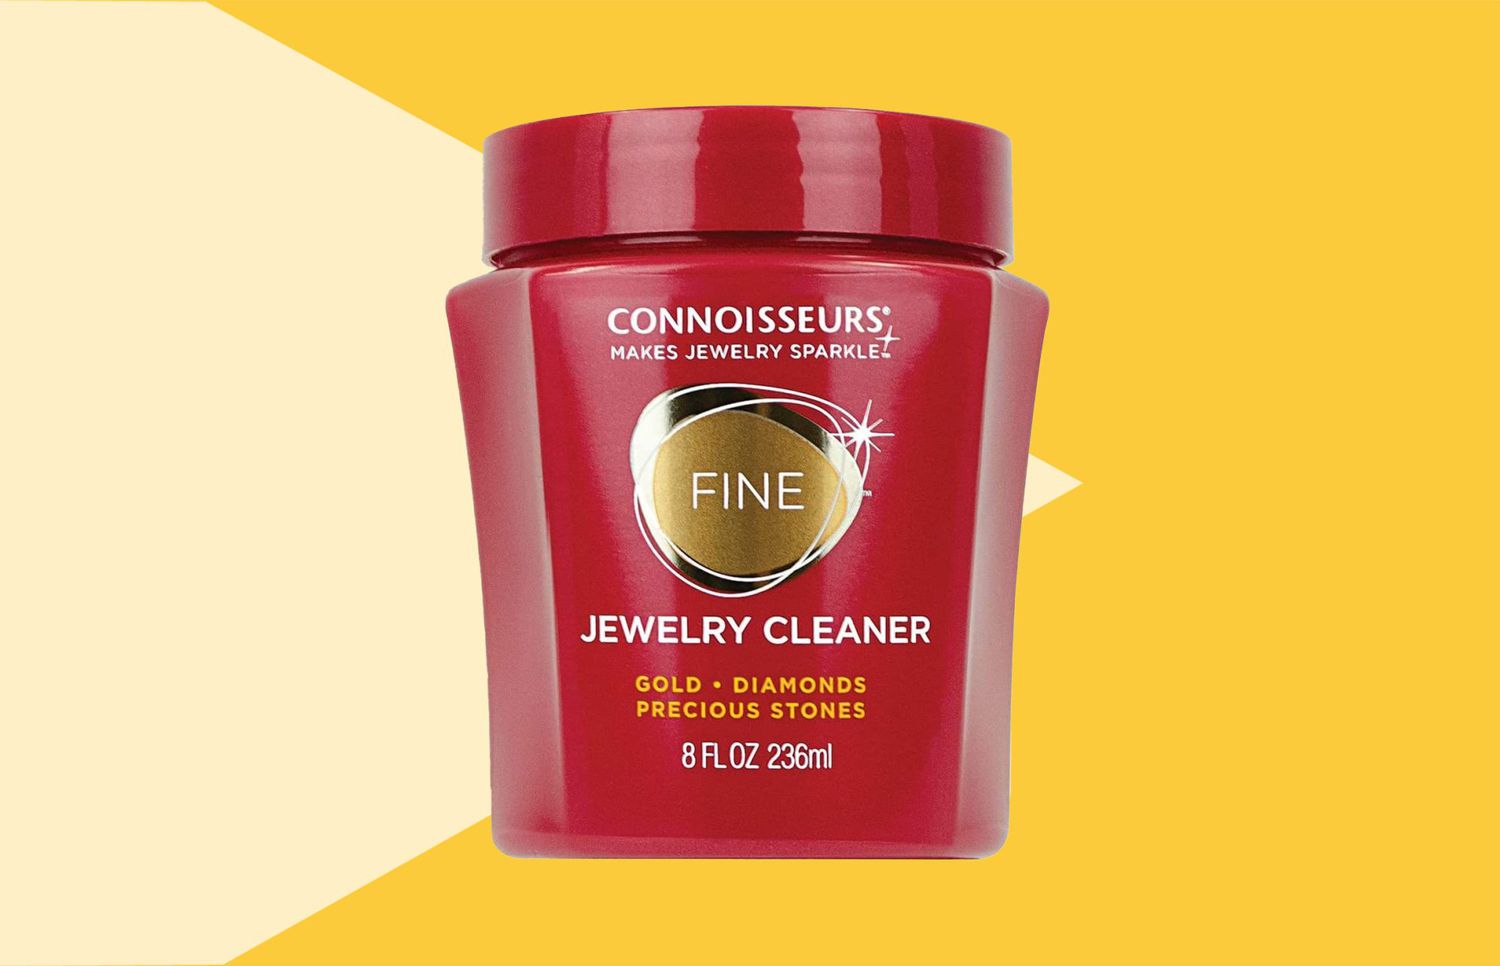 Connoisseurs Fine Jewelry Cleaner | Bring New Life Back to Gold, Platinum, Diamonds, and Precious Gemstones in Just 30 Seconds - 8 Fl Oz